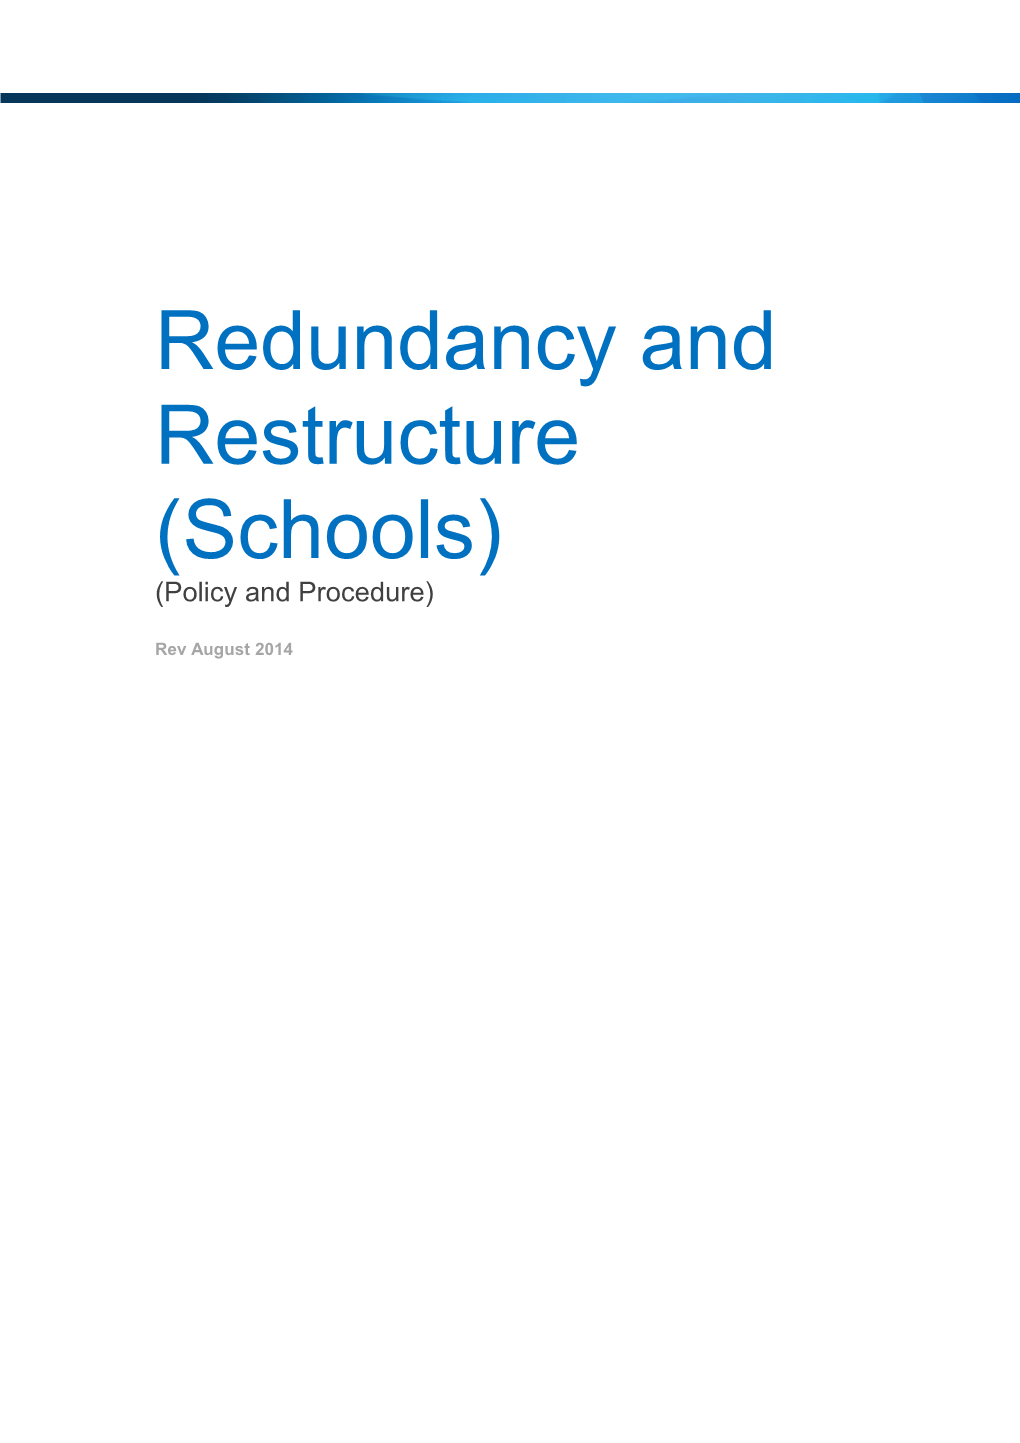 Redundancy and Restructure